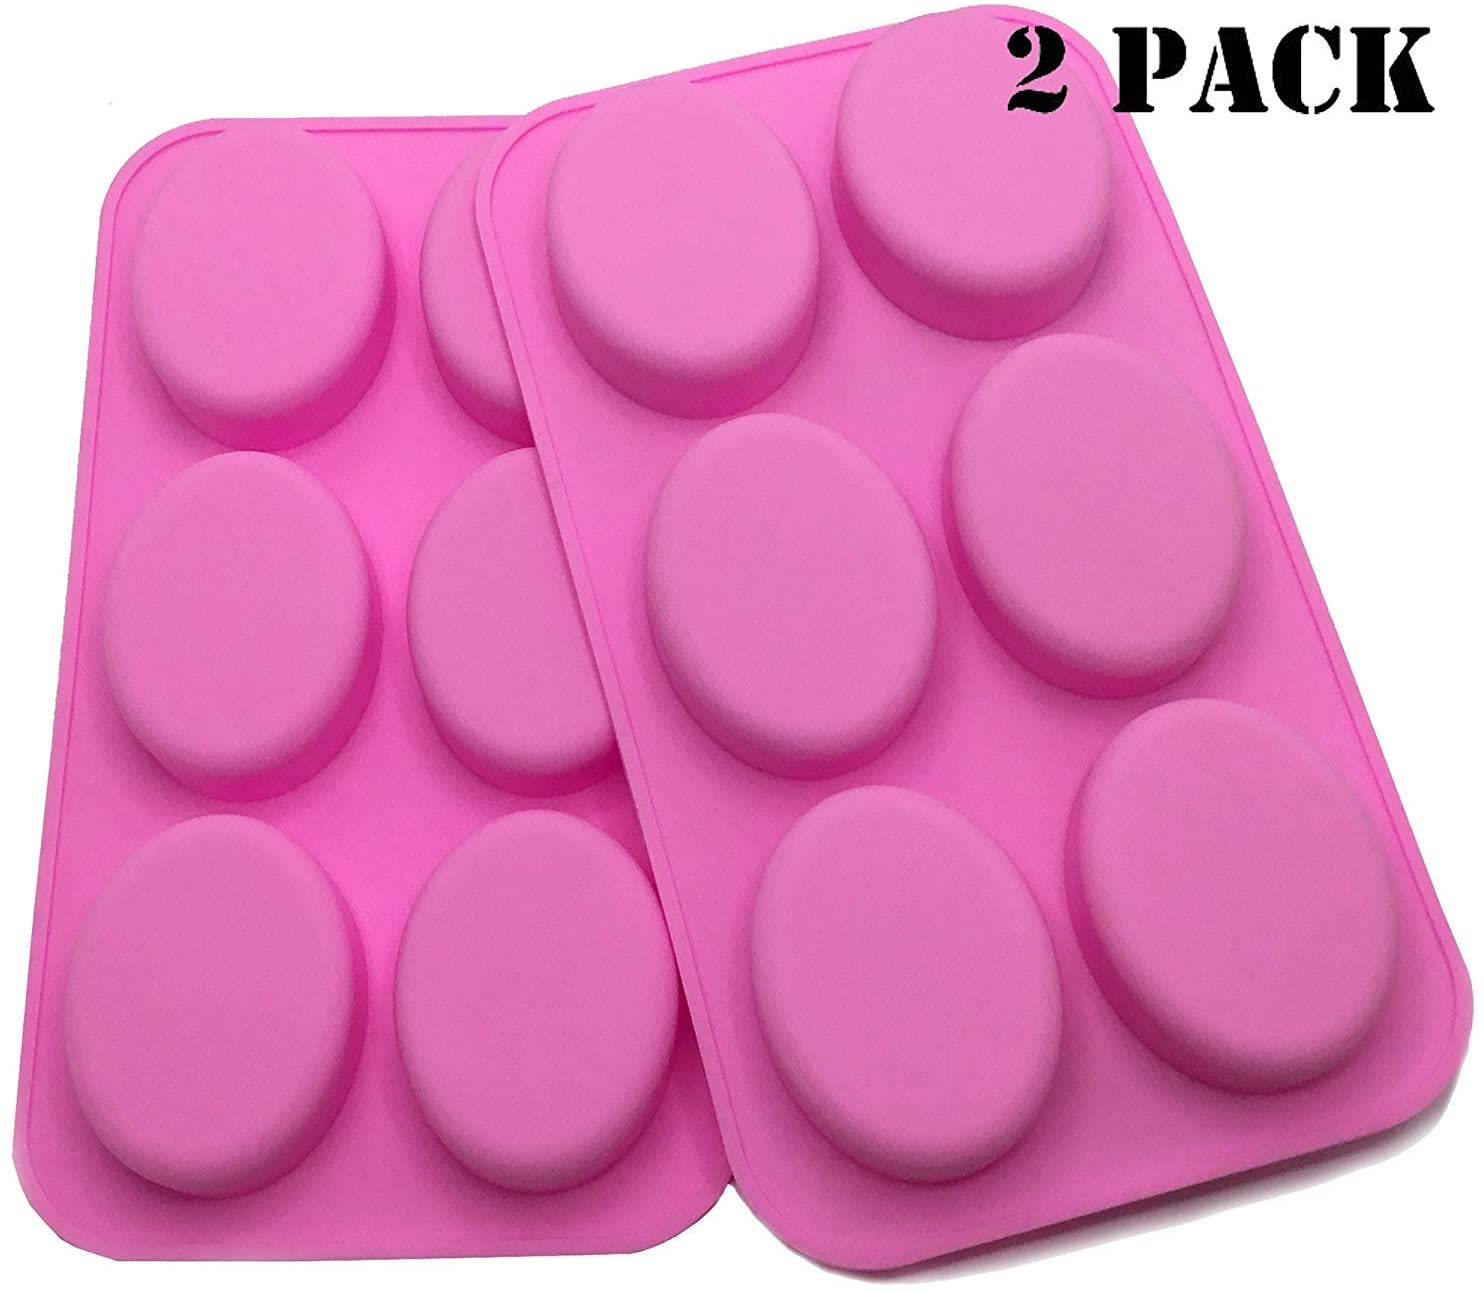 SILIKELOVE 4 Cavity Oval Soap Mold Silicone Molds for Soap Making 3D  Handmade Soap Forms Soap